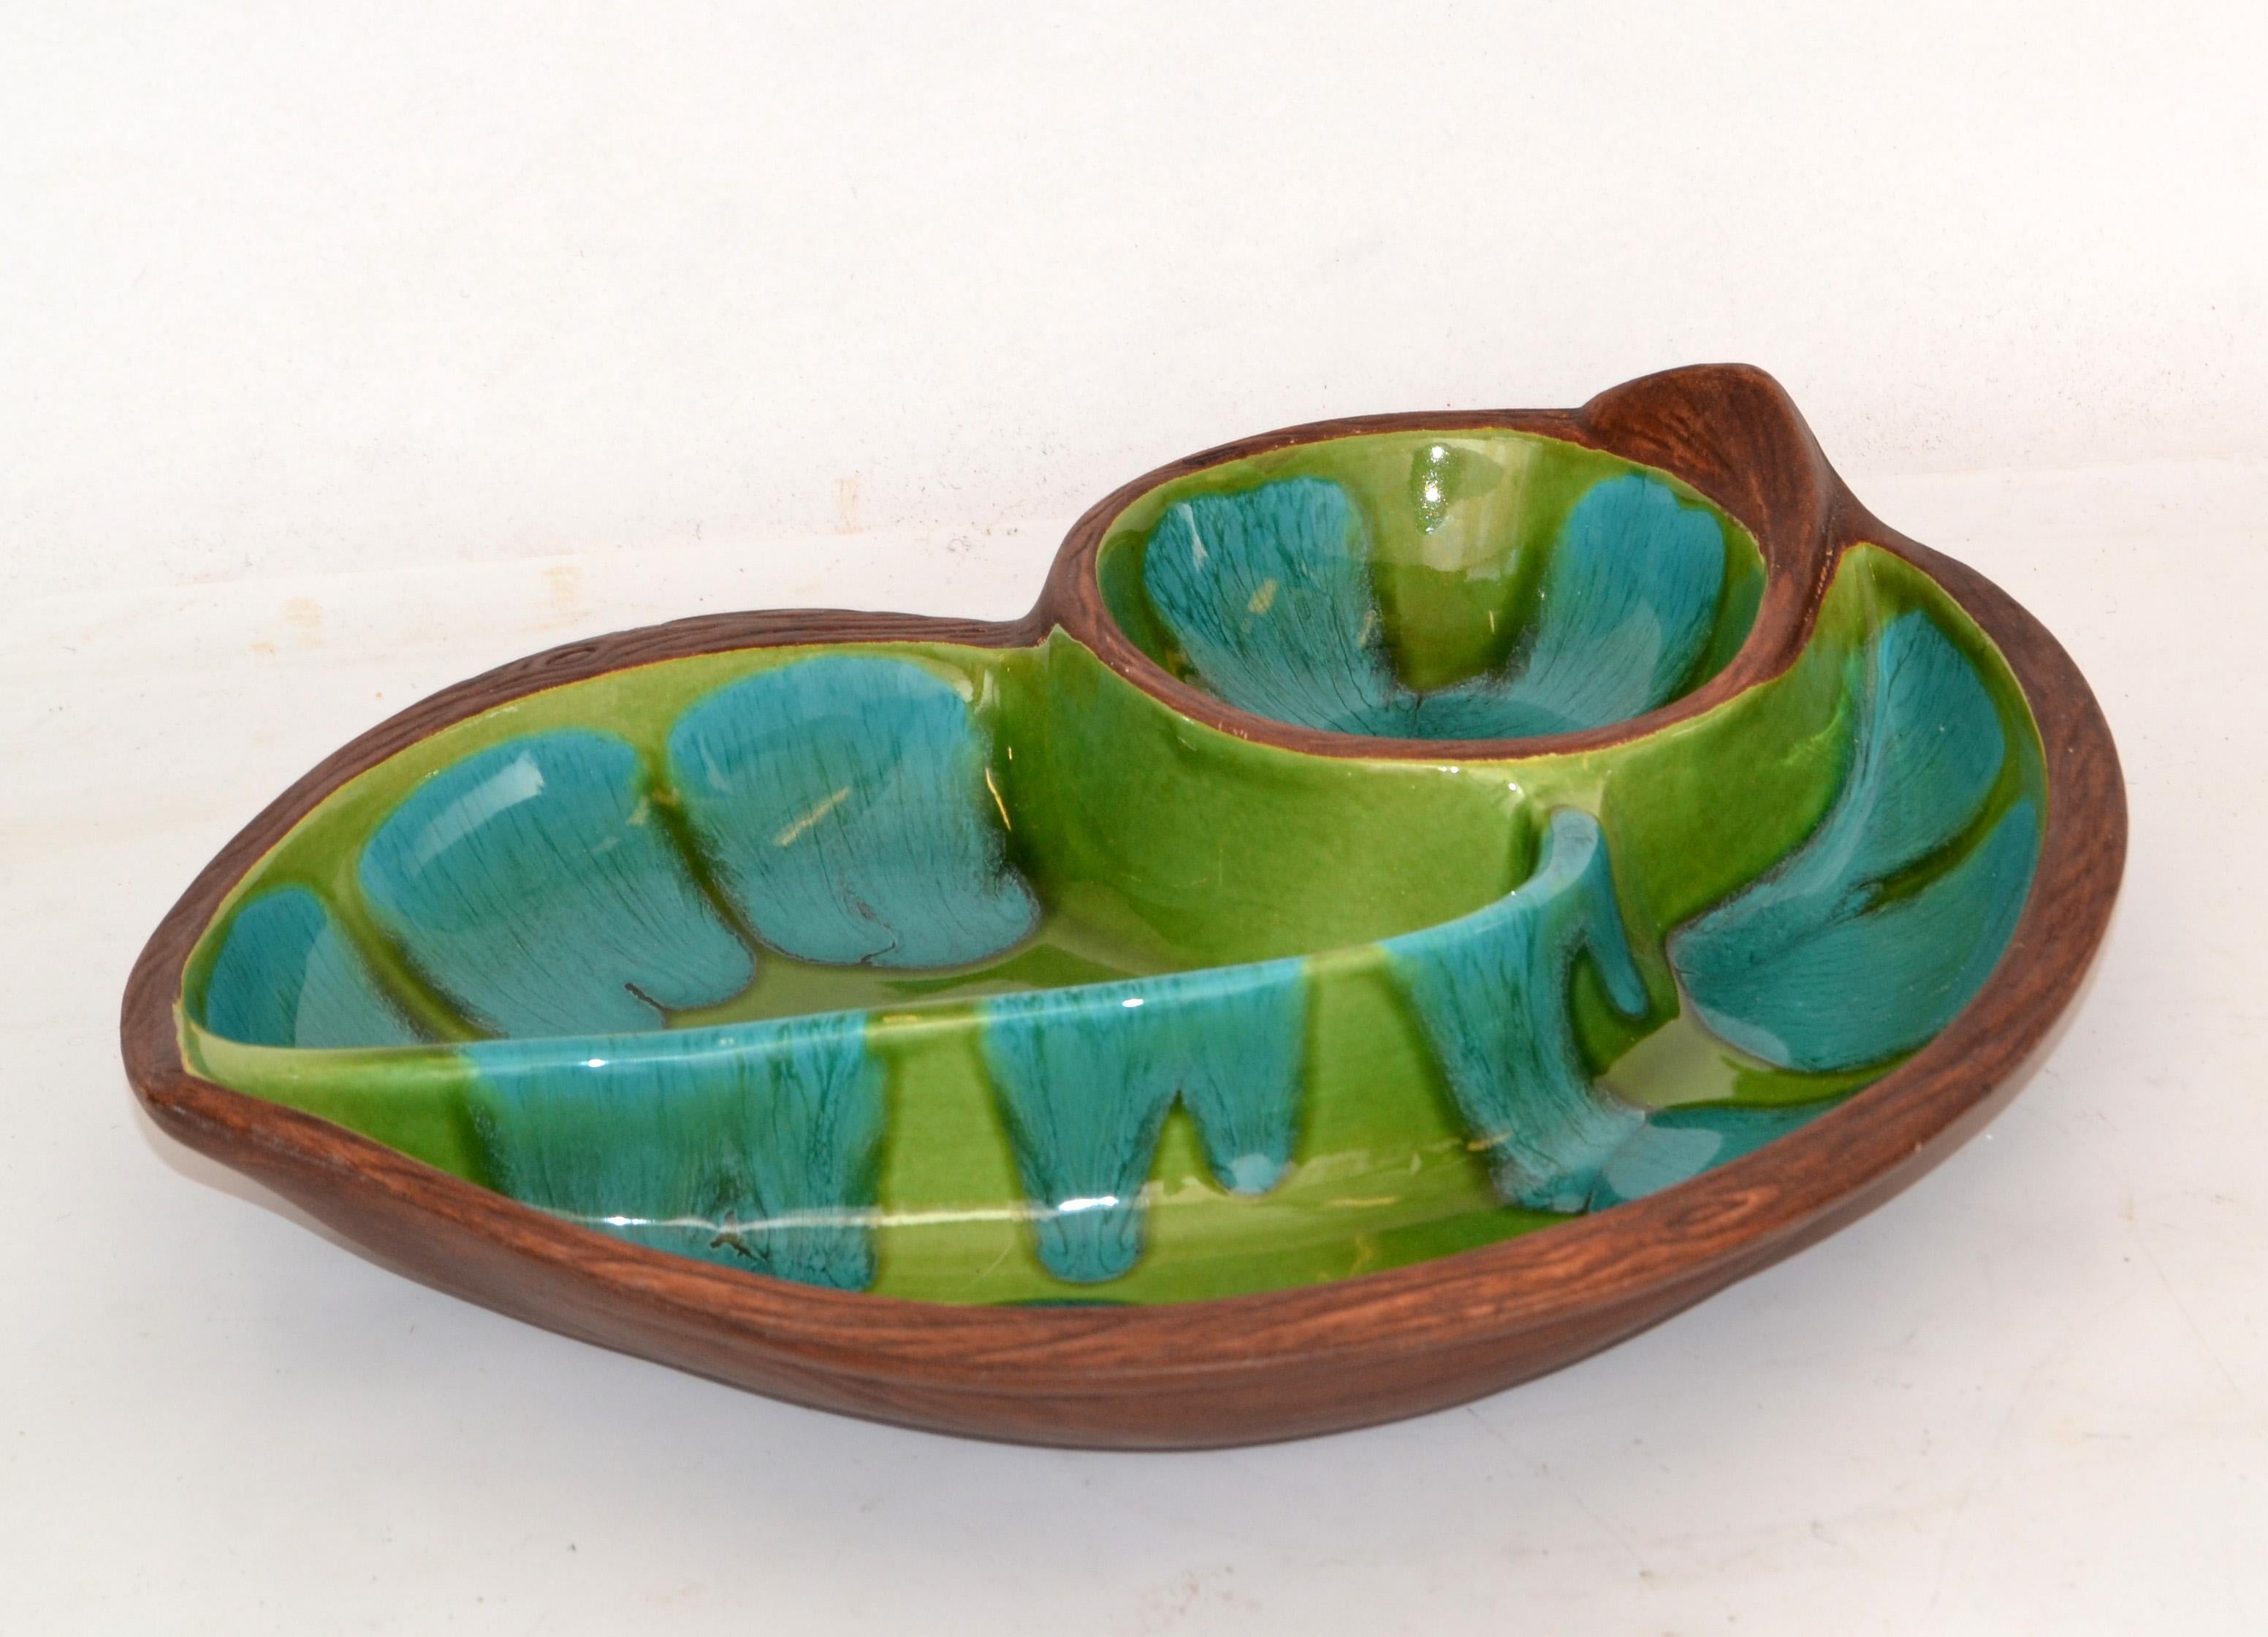 Brown Green Turquoise Glazed Ceramic Pottery Dish Mid-Century Modern, USA For Sale 8